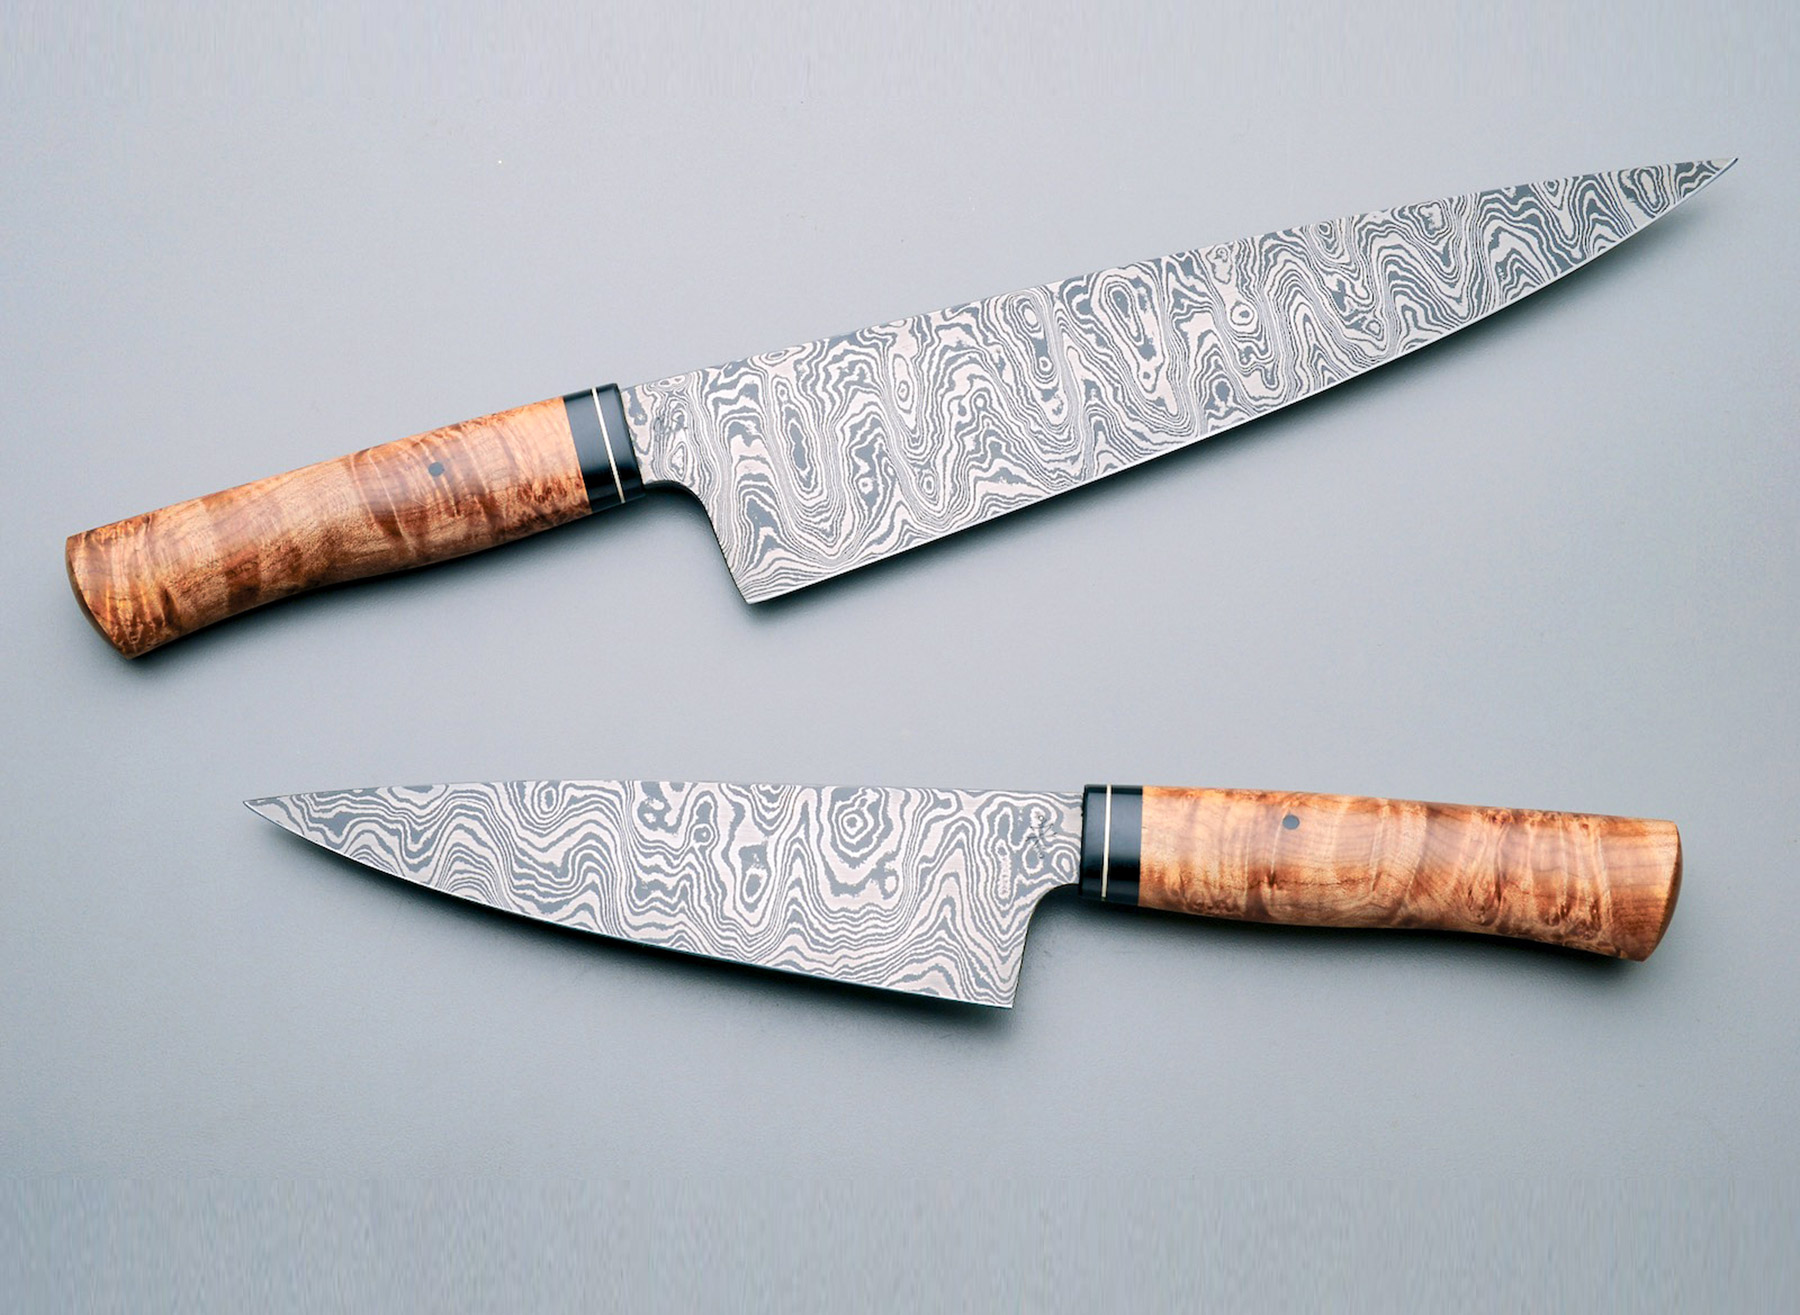 News Tagged Good Quality Cooking Knives - Best Damascus Chef's